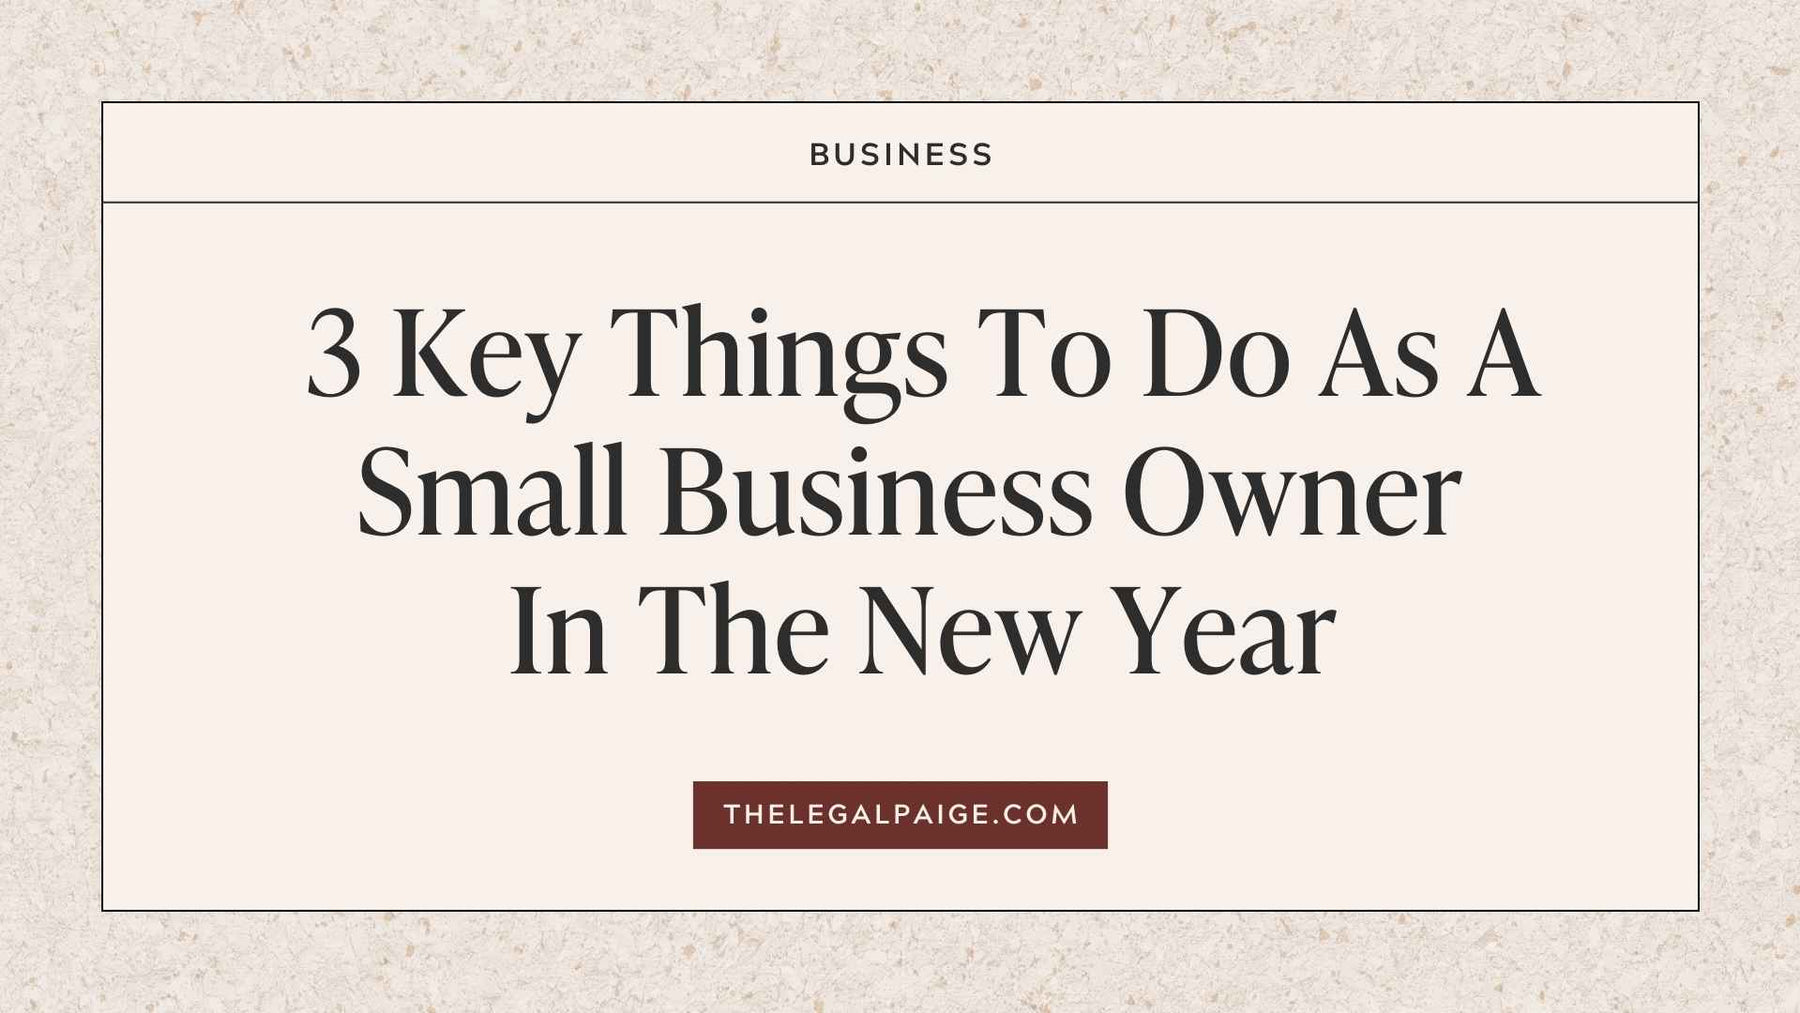 3 Key Things To Do As A Small Business Owner In The New Year